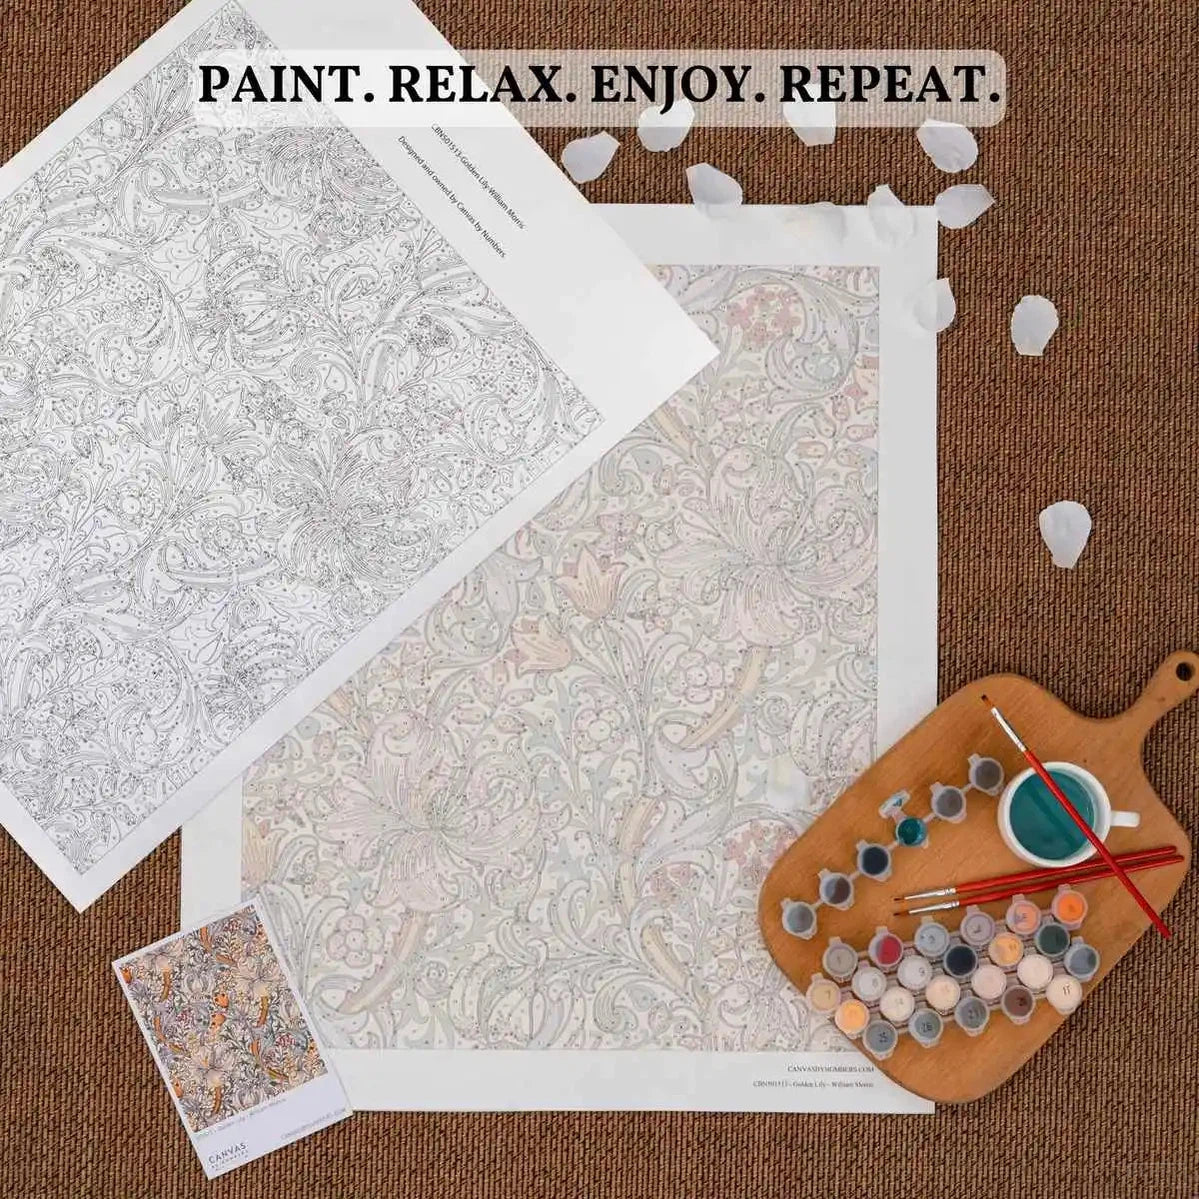 Cassone Church - Paint by Numbers-Klimt's Cassone Church paint by numbers kit looks stunning when completed, and it's super fun to paint! Free US shipping and 60 days guarantee.-Canvas by Numbers